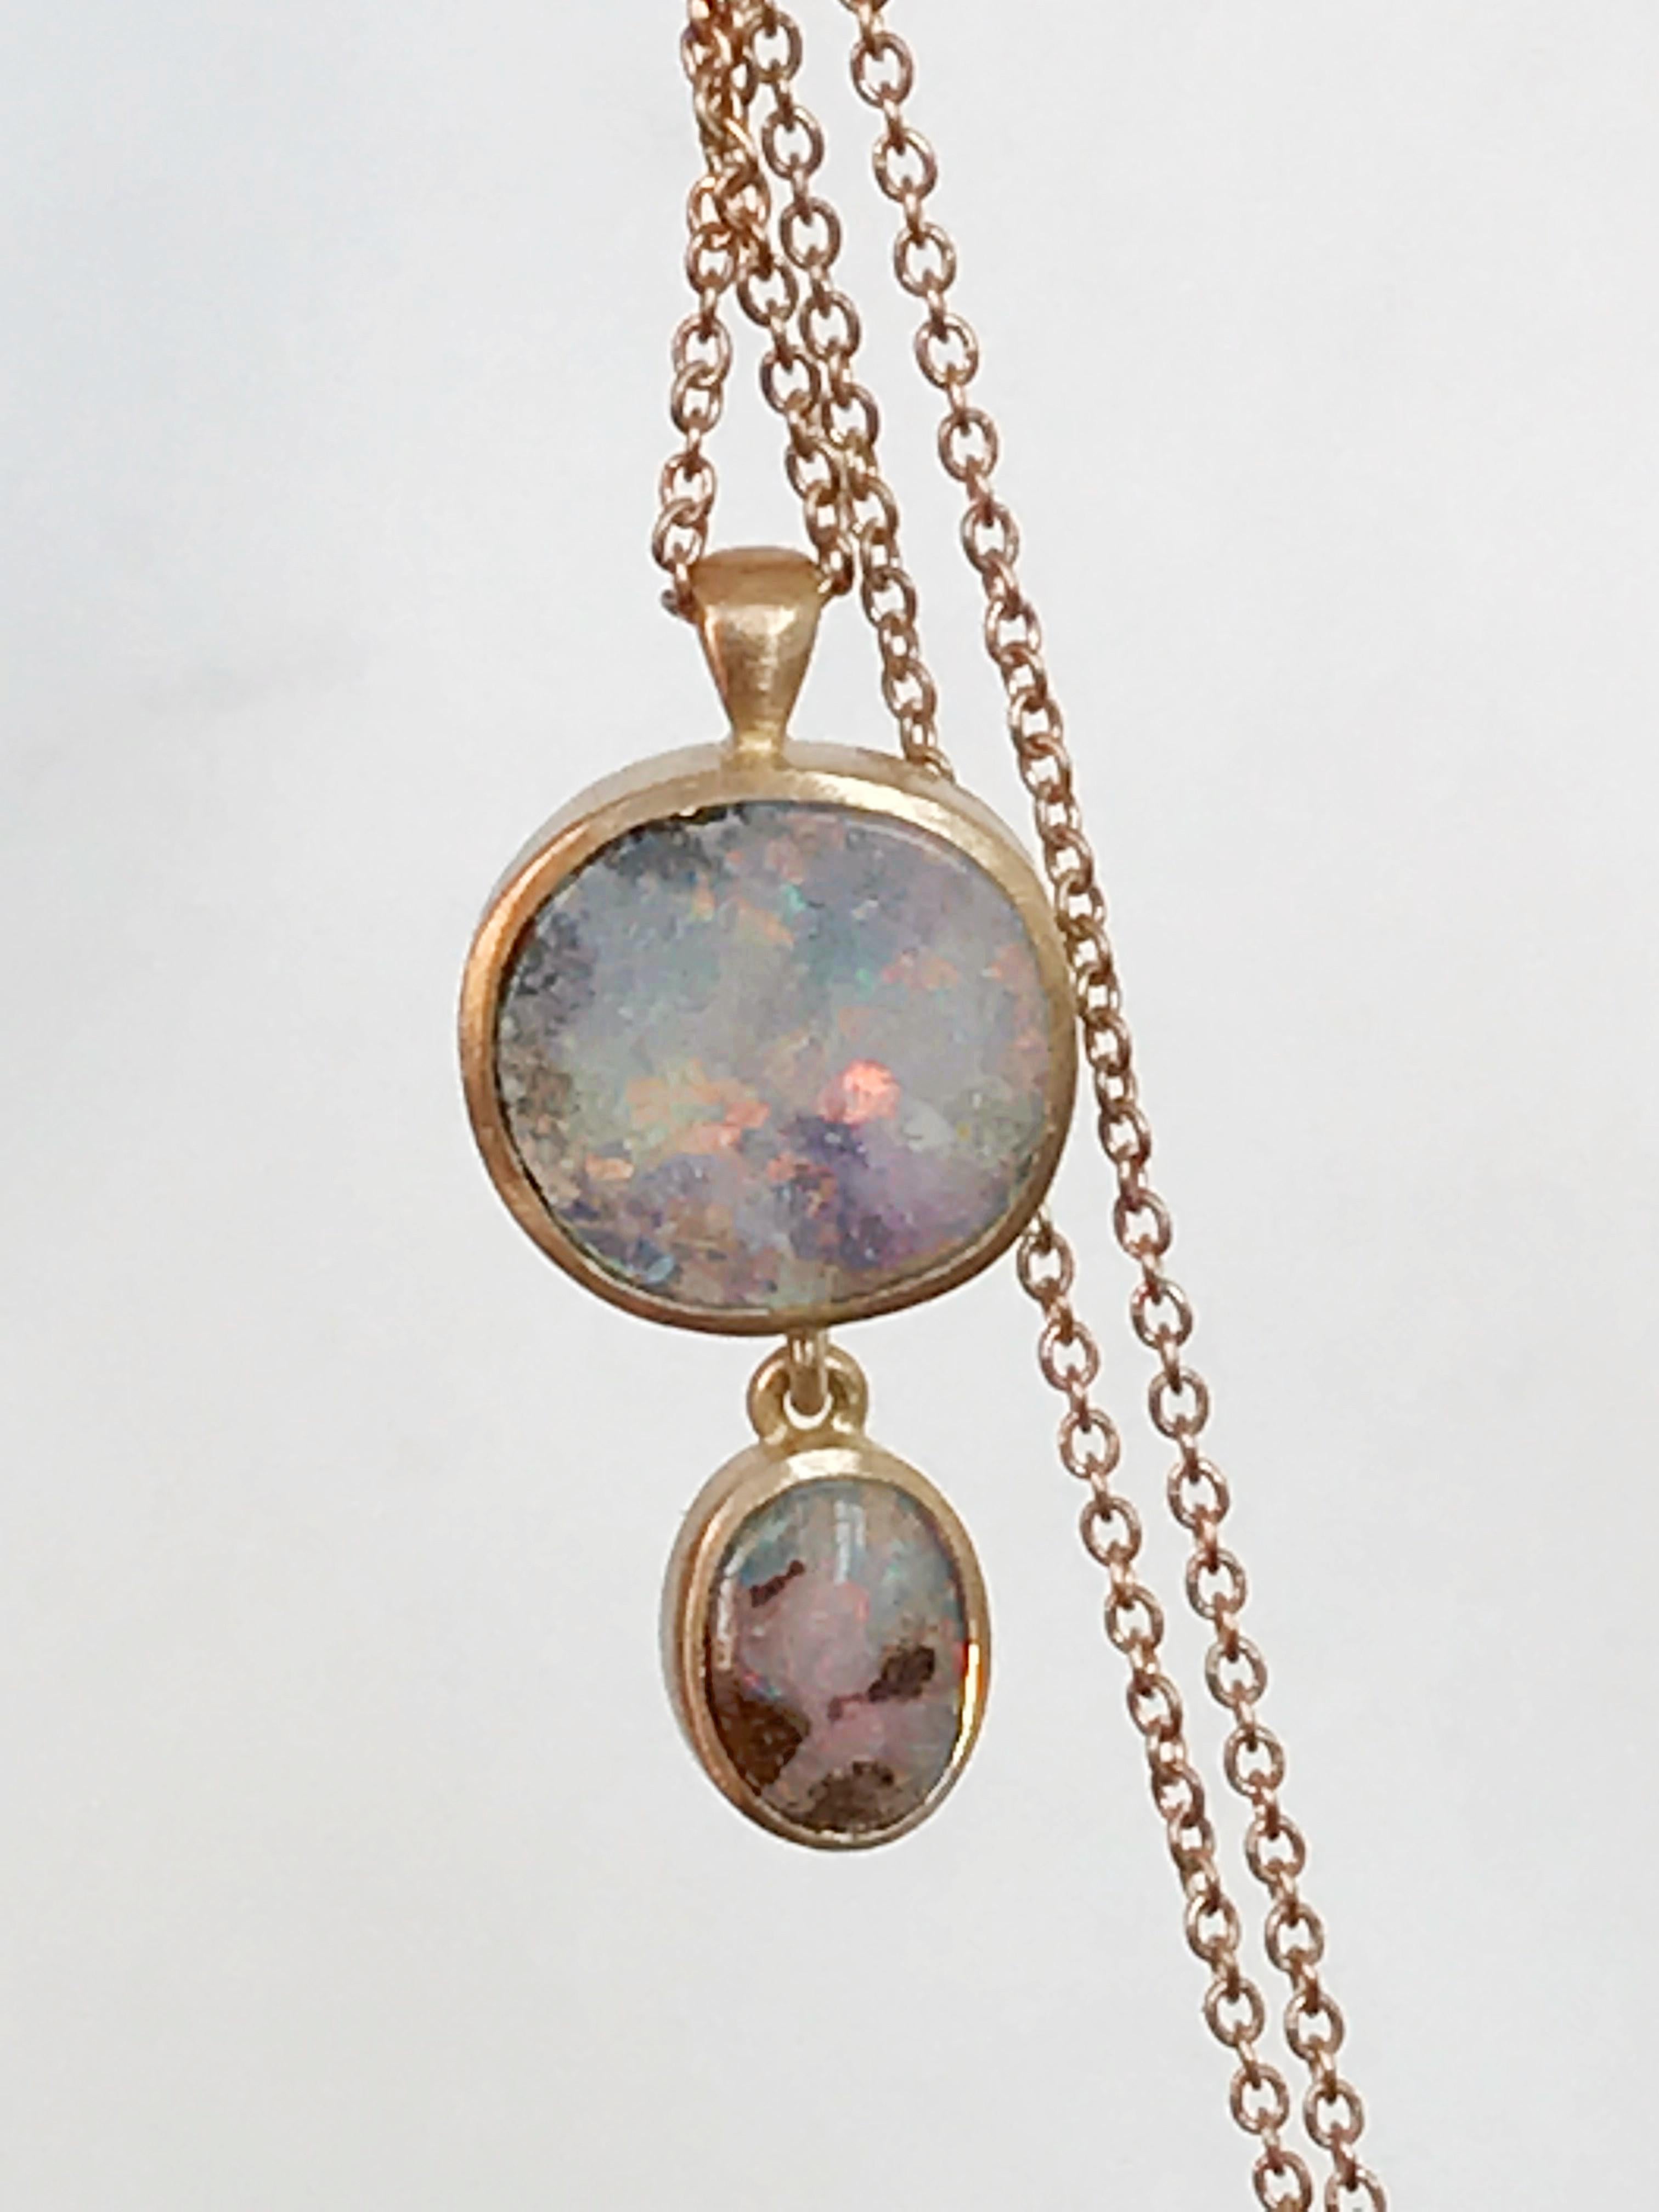 Dalben design One of a Kind 18k rose gold matte finishing necklace with two bezel-set  Australian Boulder Opals weight 3,18 carat. 
pendant dimension : 
width 10,4 mm (0,41 inch )
height 19,4 mm (0,76 inch )
Chain length 42 cm ( 16,5 inch )